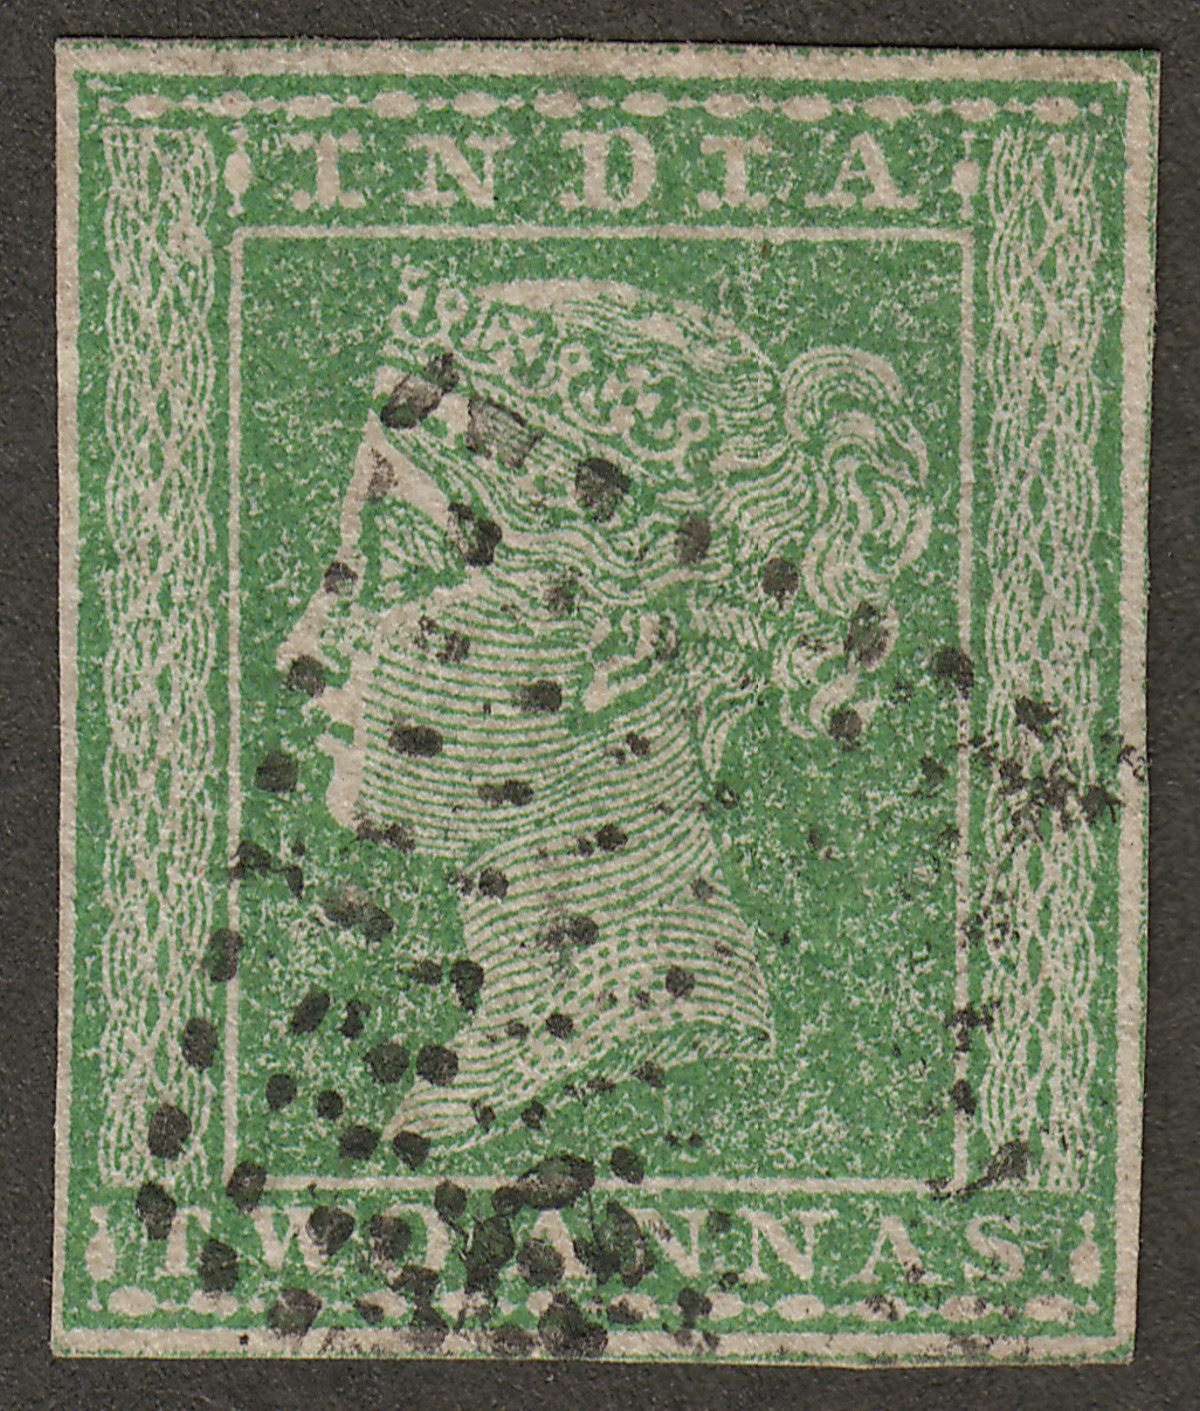 India 1854 Queen Victoria 2a Green Imperf Used SG31 cat £50 four margins w thin